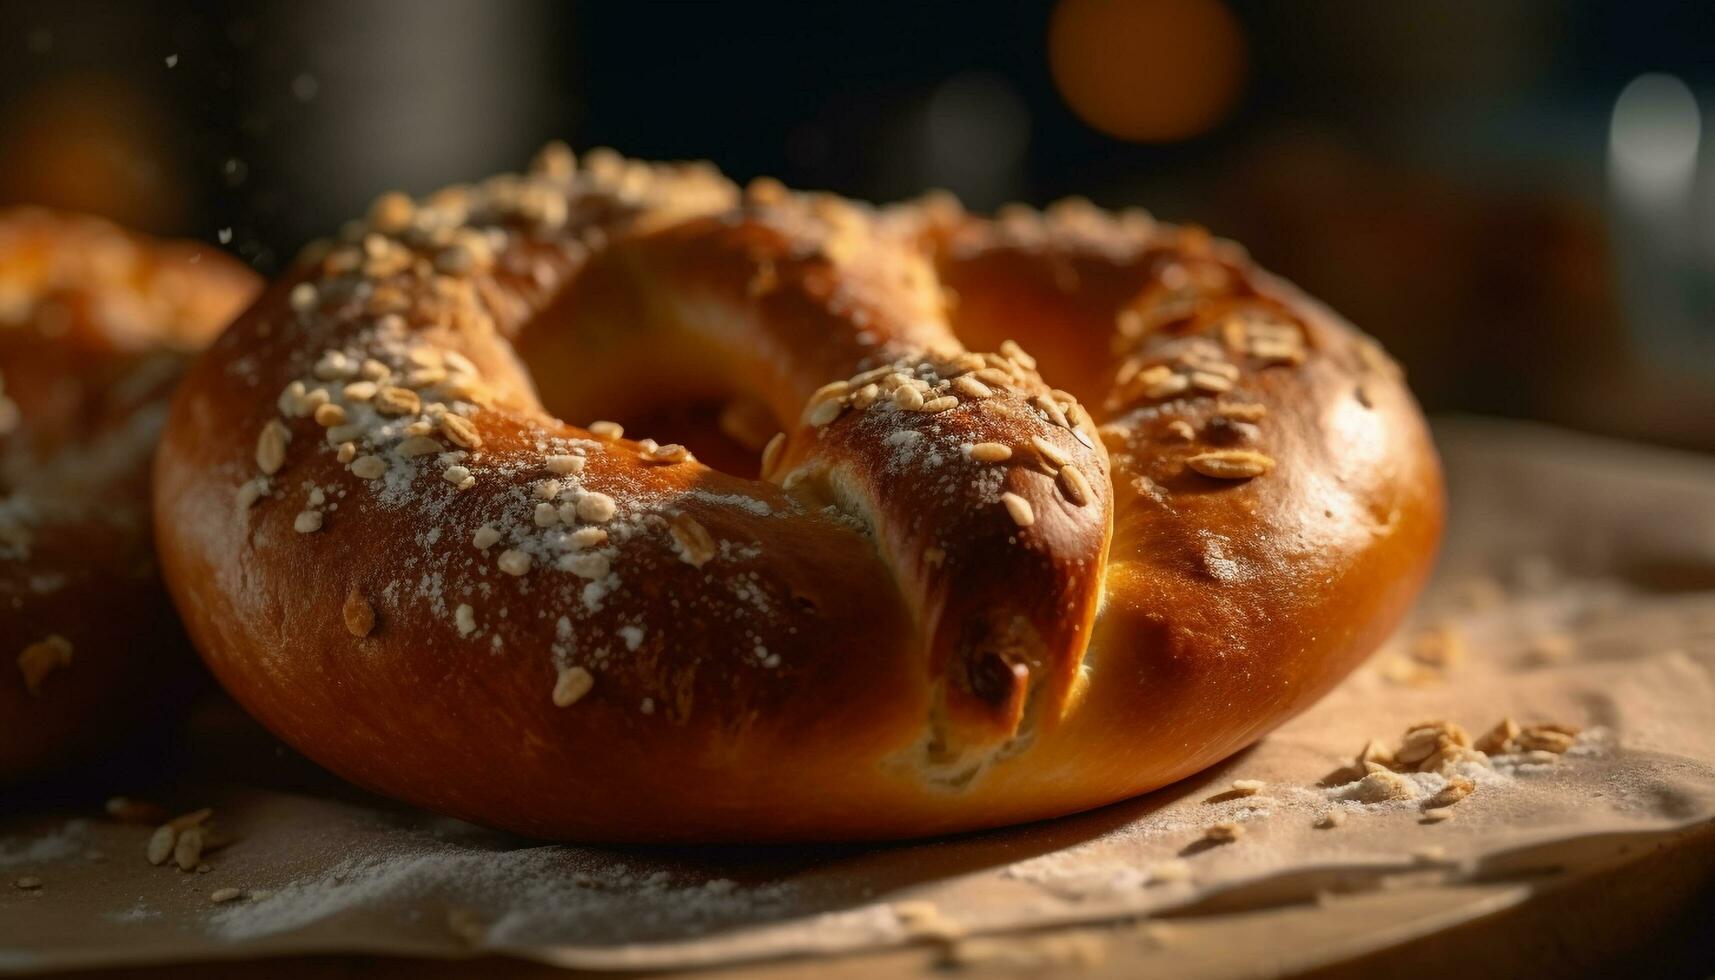 Freshly baked bagel, a gourmet snack for a sweet indulgence generated by AI photo